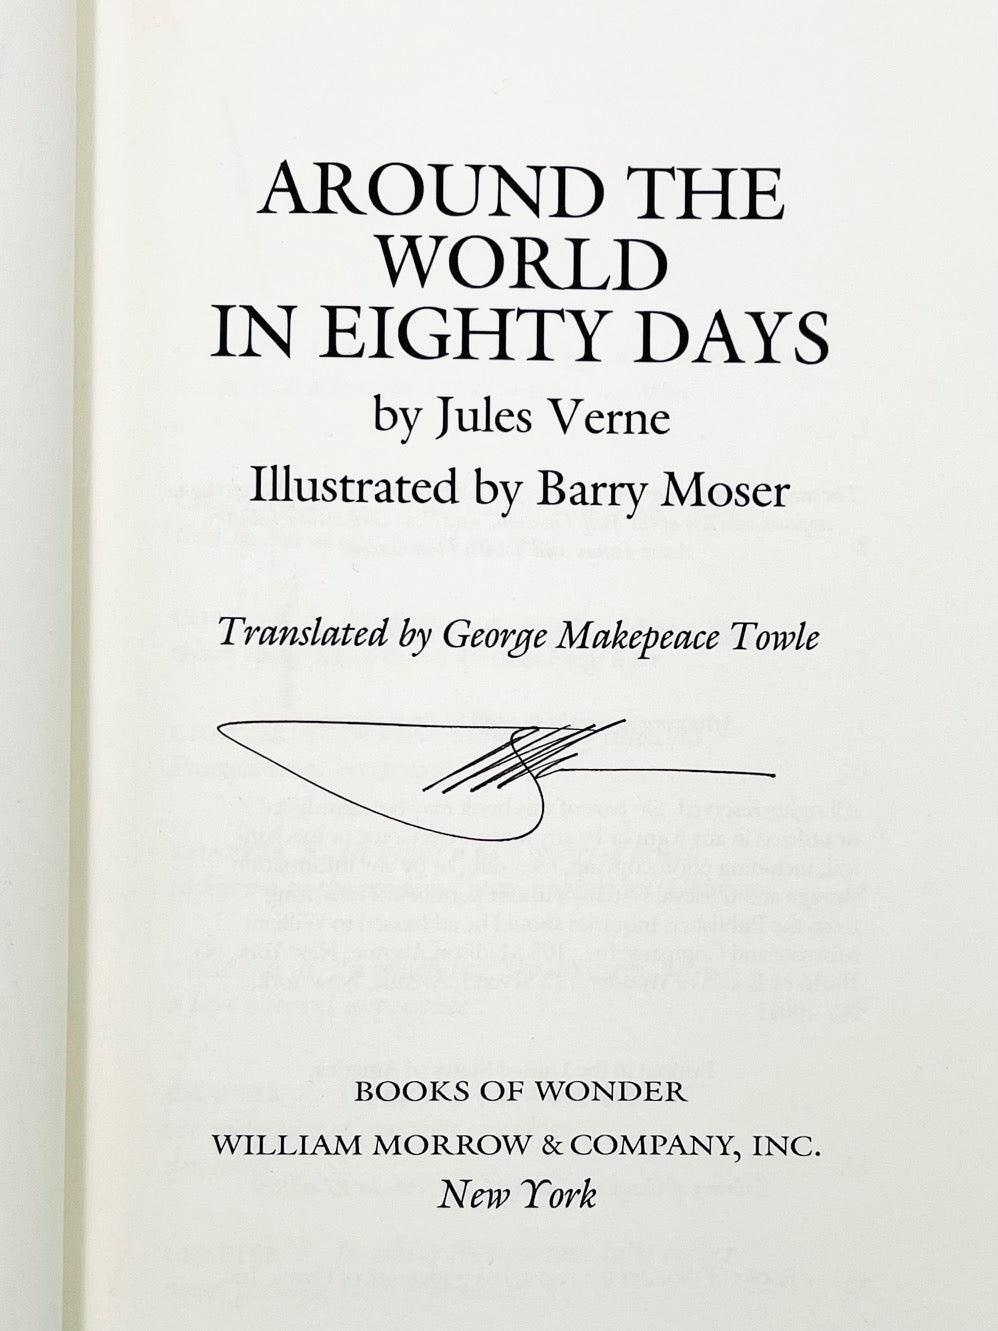 Around the World in Eighty Days (signed by Barry Moser) - Grinning Cat Books - CHILDREN'S LITERATURE - ADVENTURE